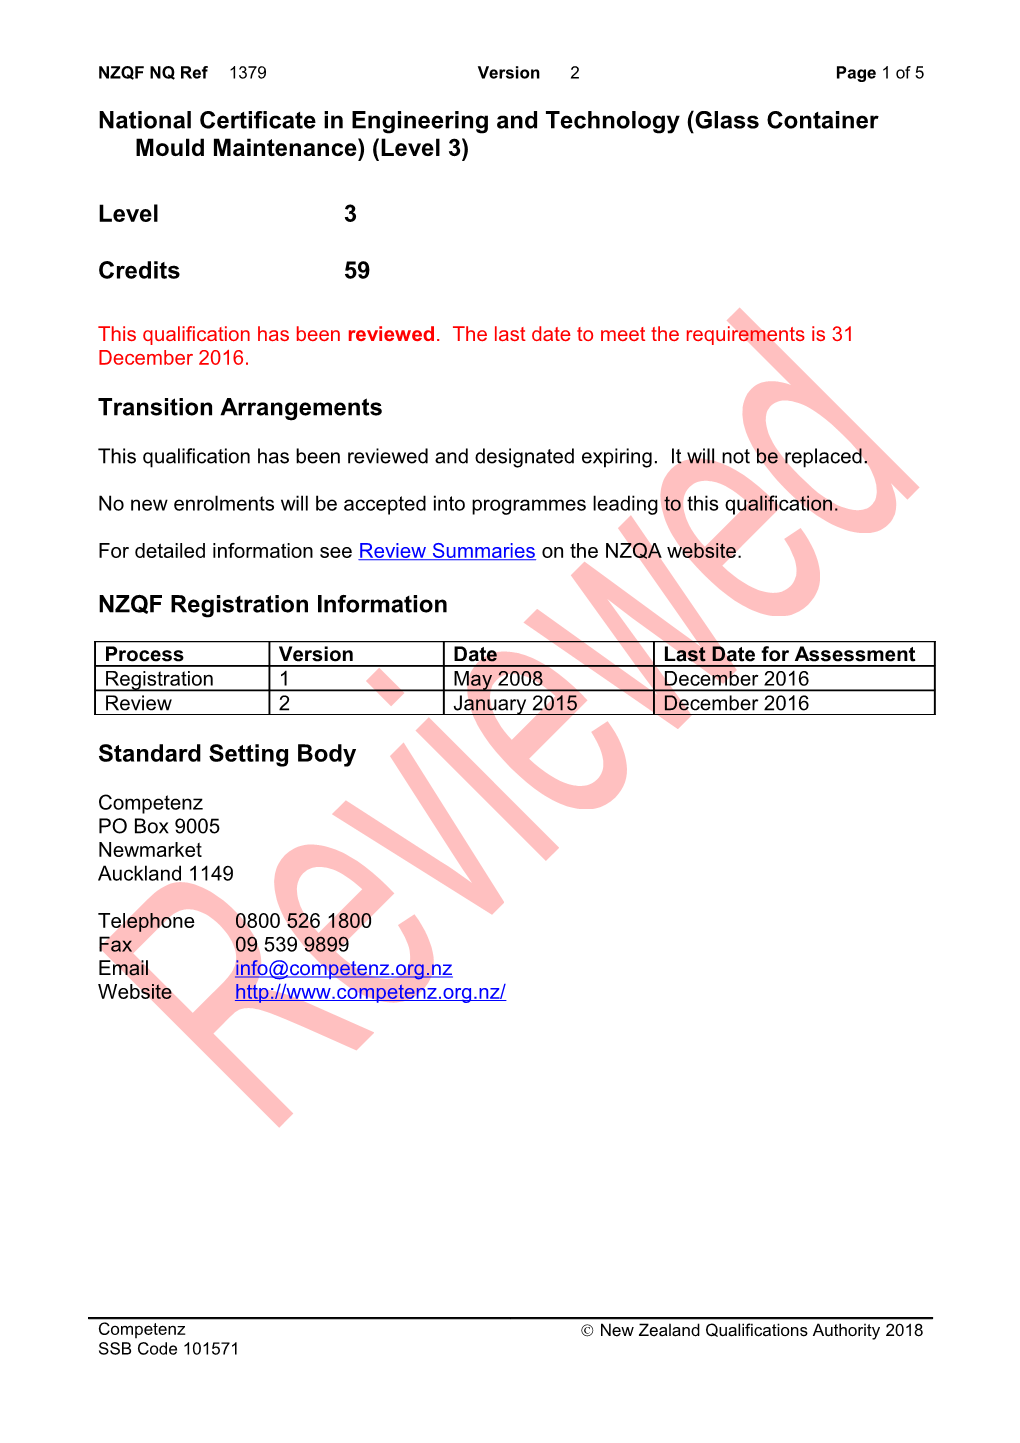 1379 National Certificate in Engineering and Technology (Glass Container Mould Maintenance)